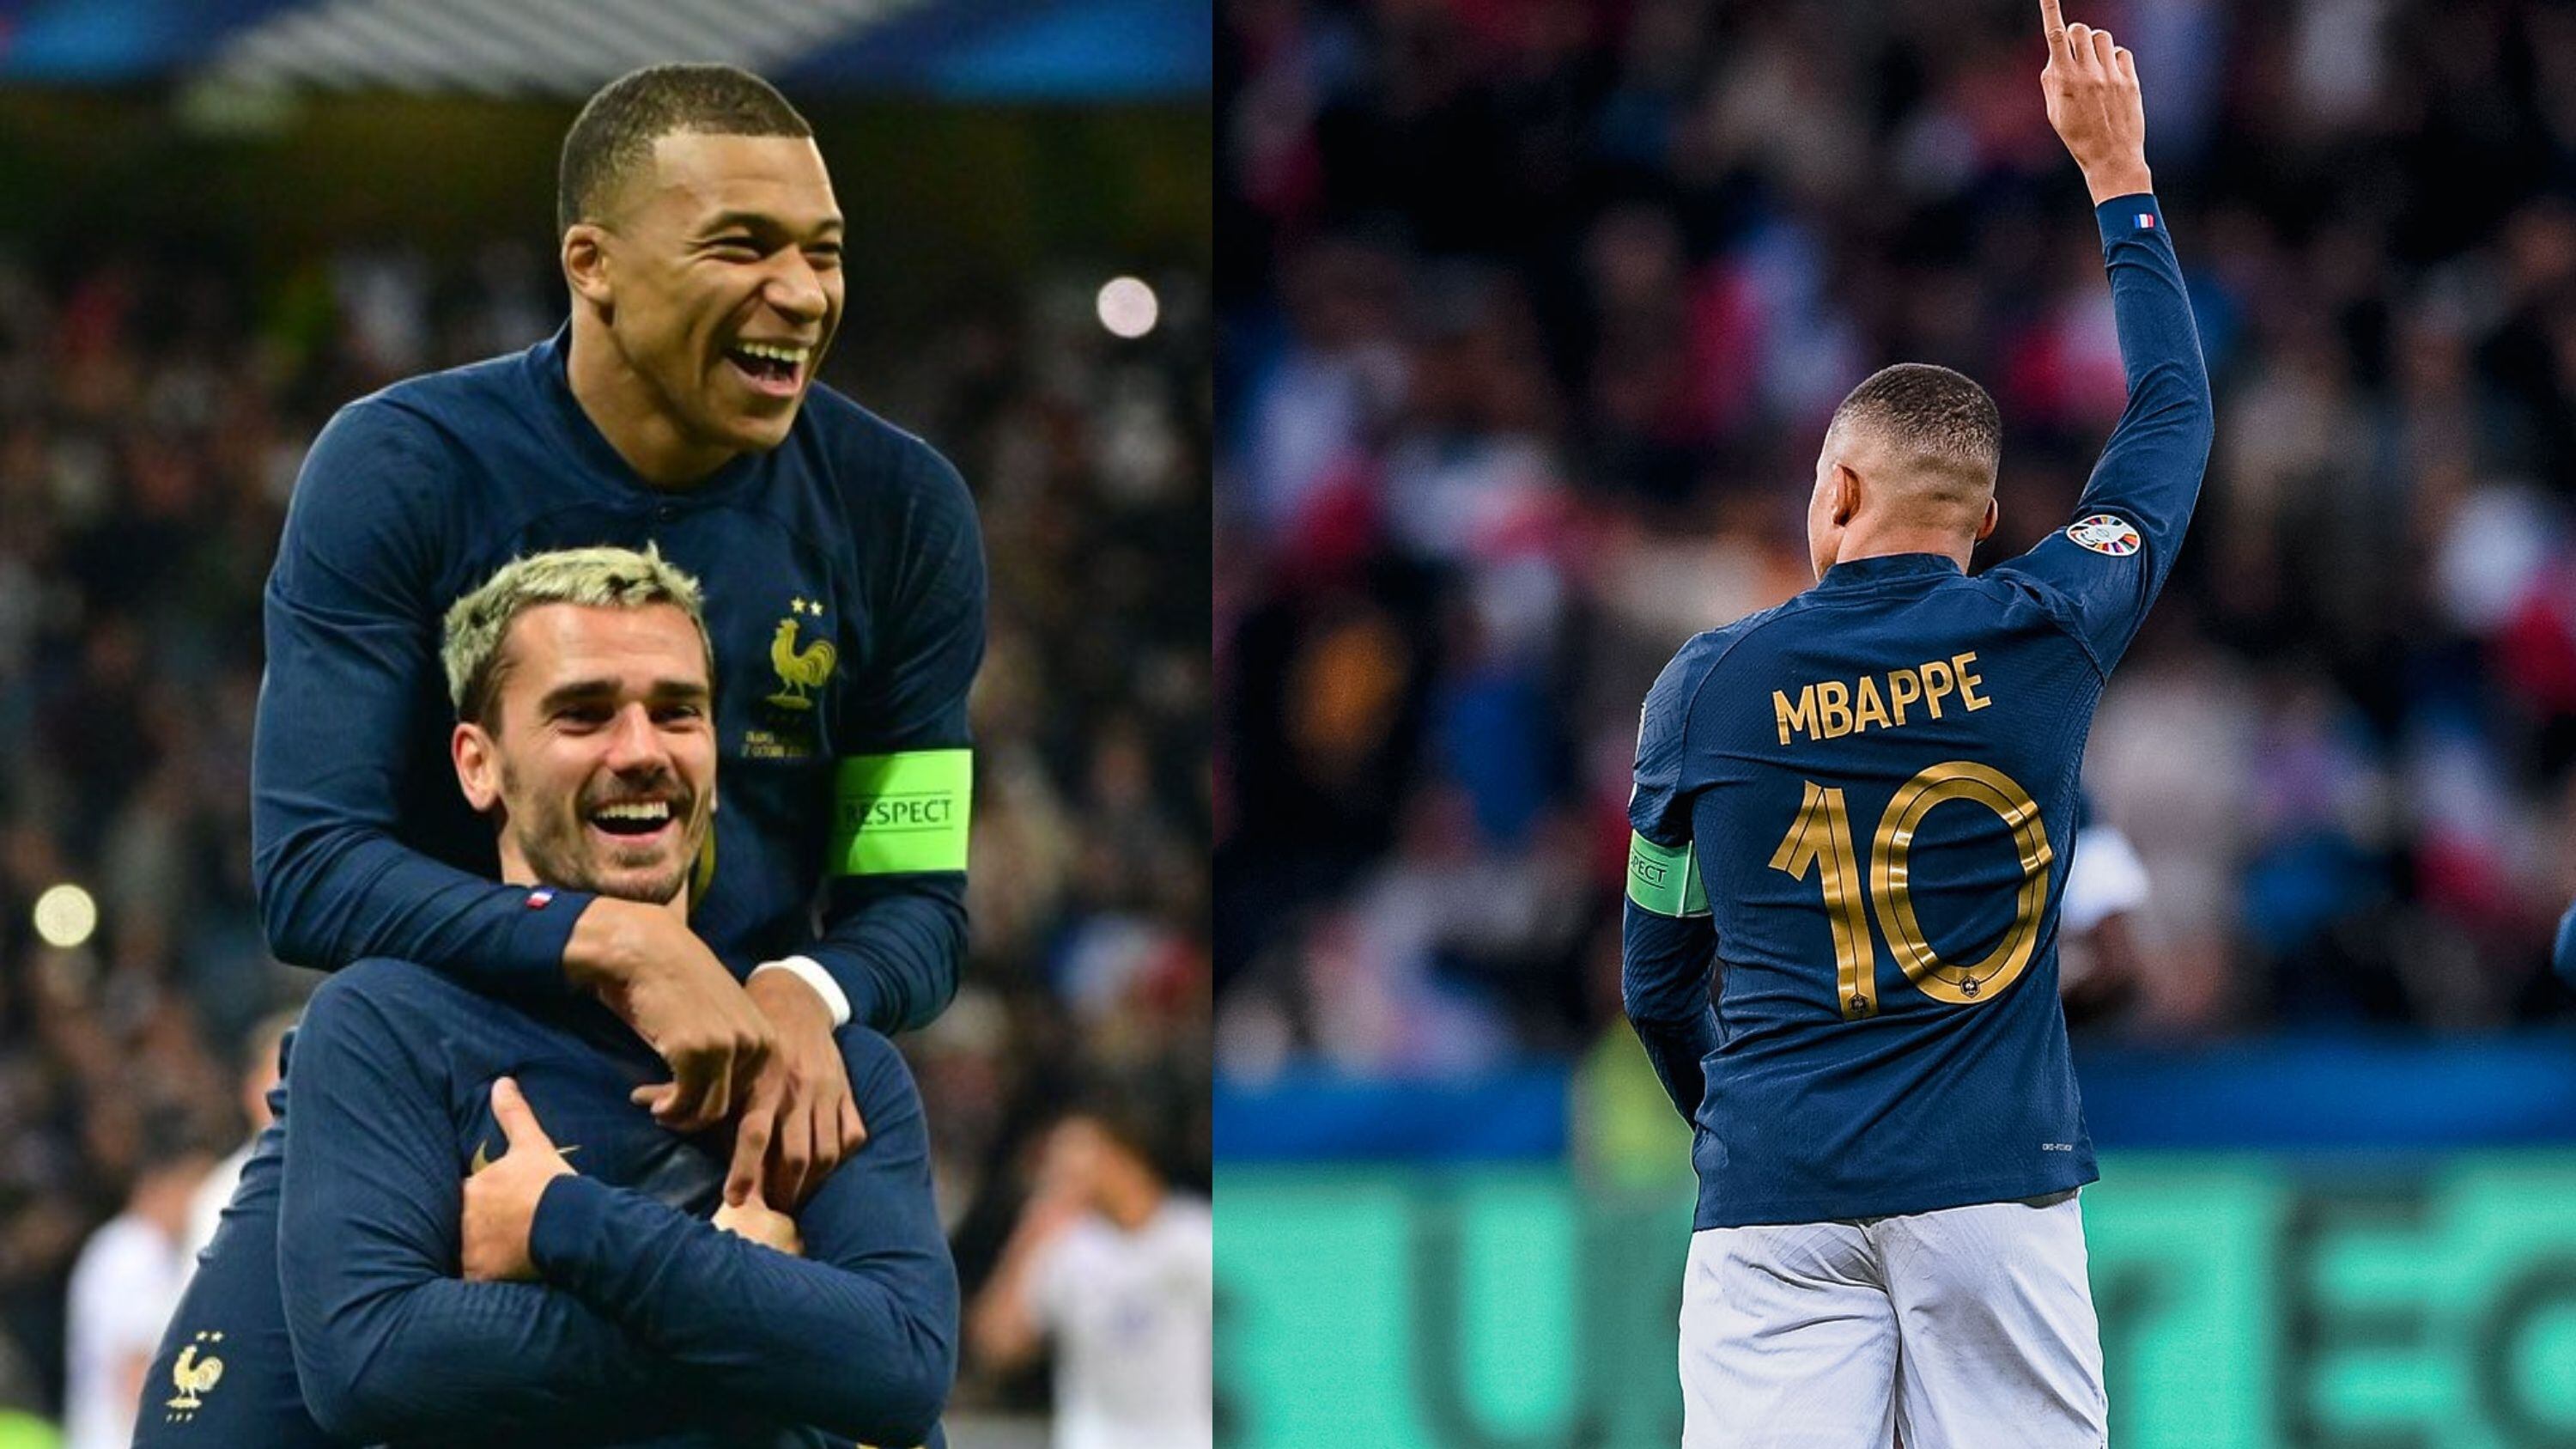 After winning 7-0 against Gibraltar, the new nickname given to Mbappe in France